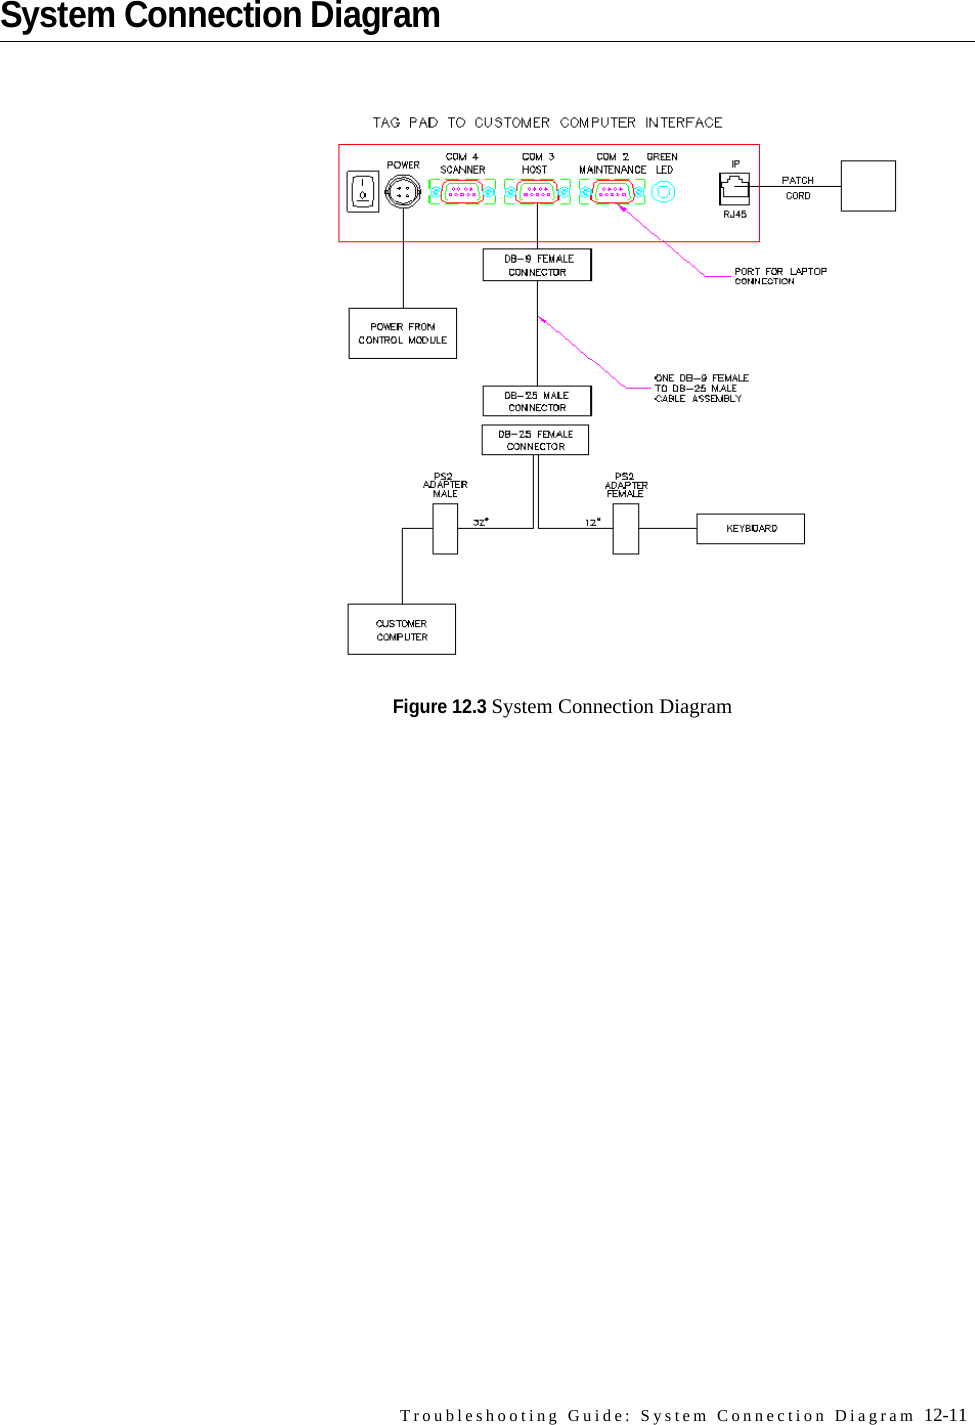 Troubleshooting Guide: System Connection Diagram 12-11System Connection DiagramFigure 12.3 System Connection Diagram